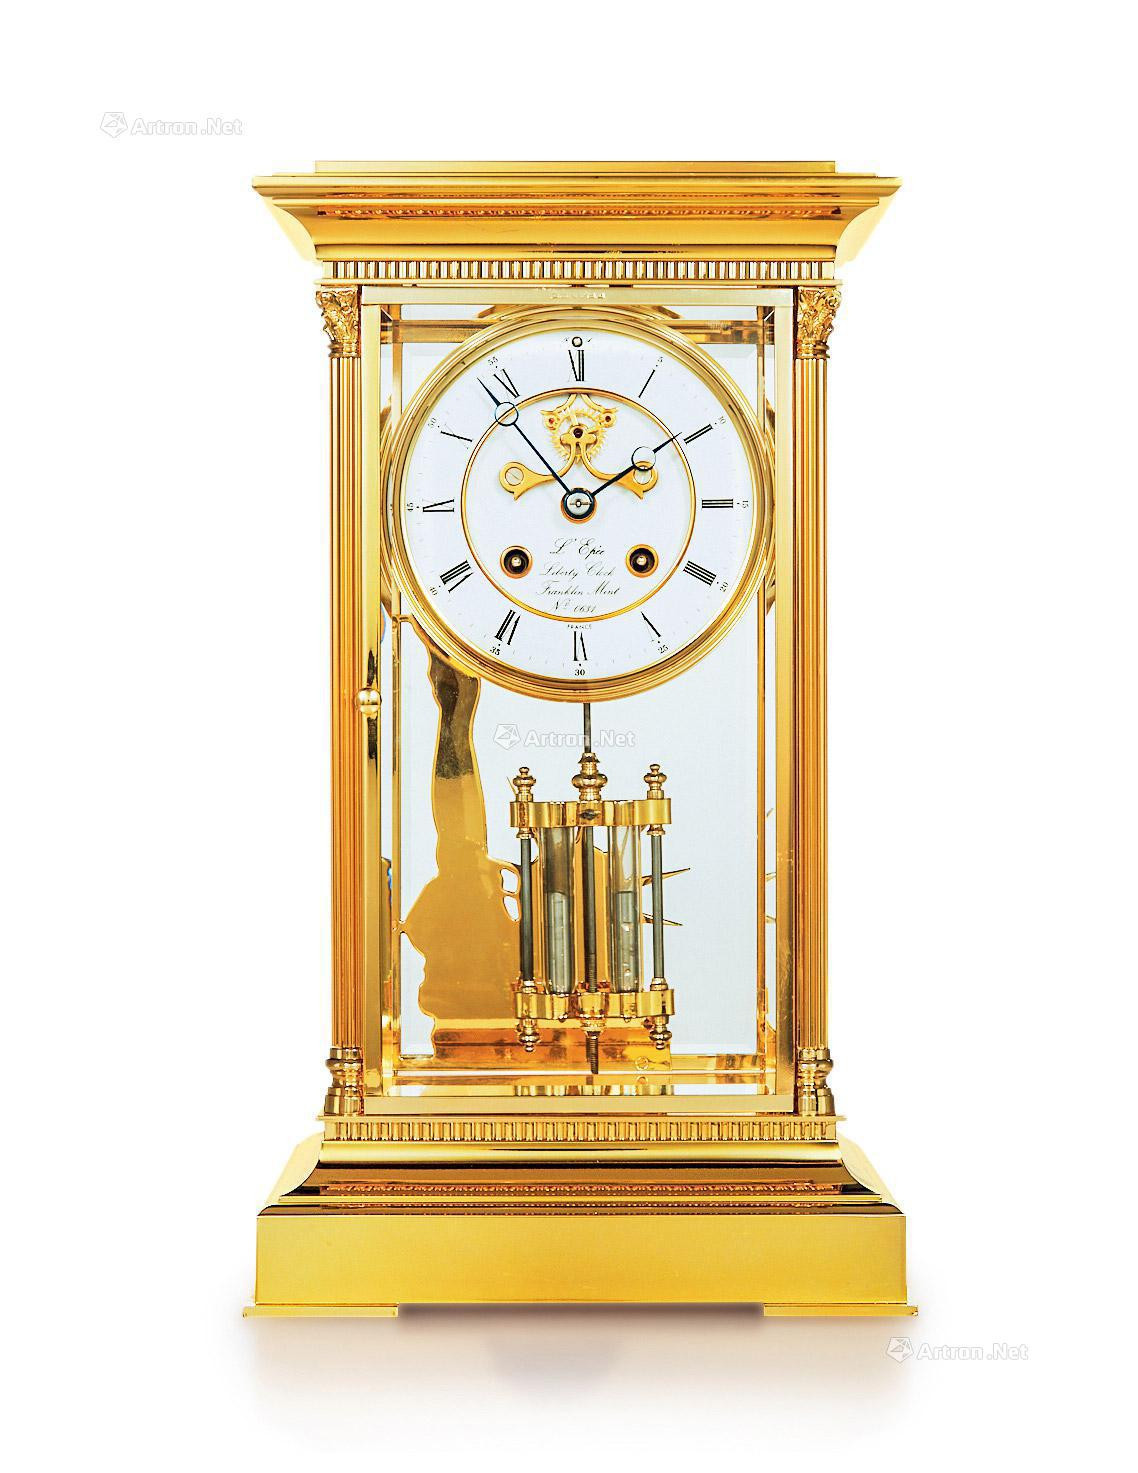 LEPINE  A FINE GILT BRASS TABLE CLOCK， WITH HOURLY AND HALF-HOUR ALARM AND MUSIC BOX FUNCTION